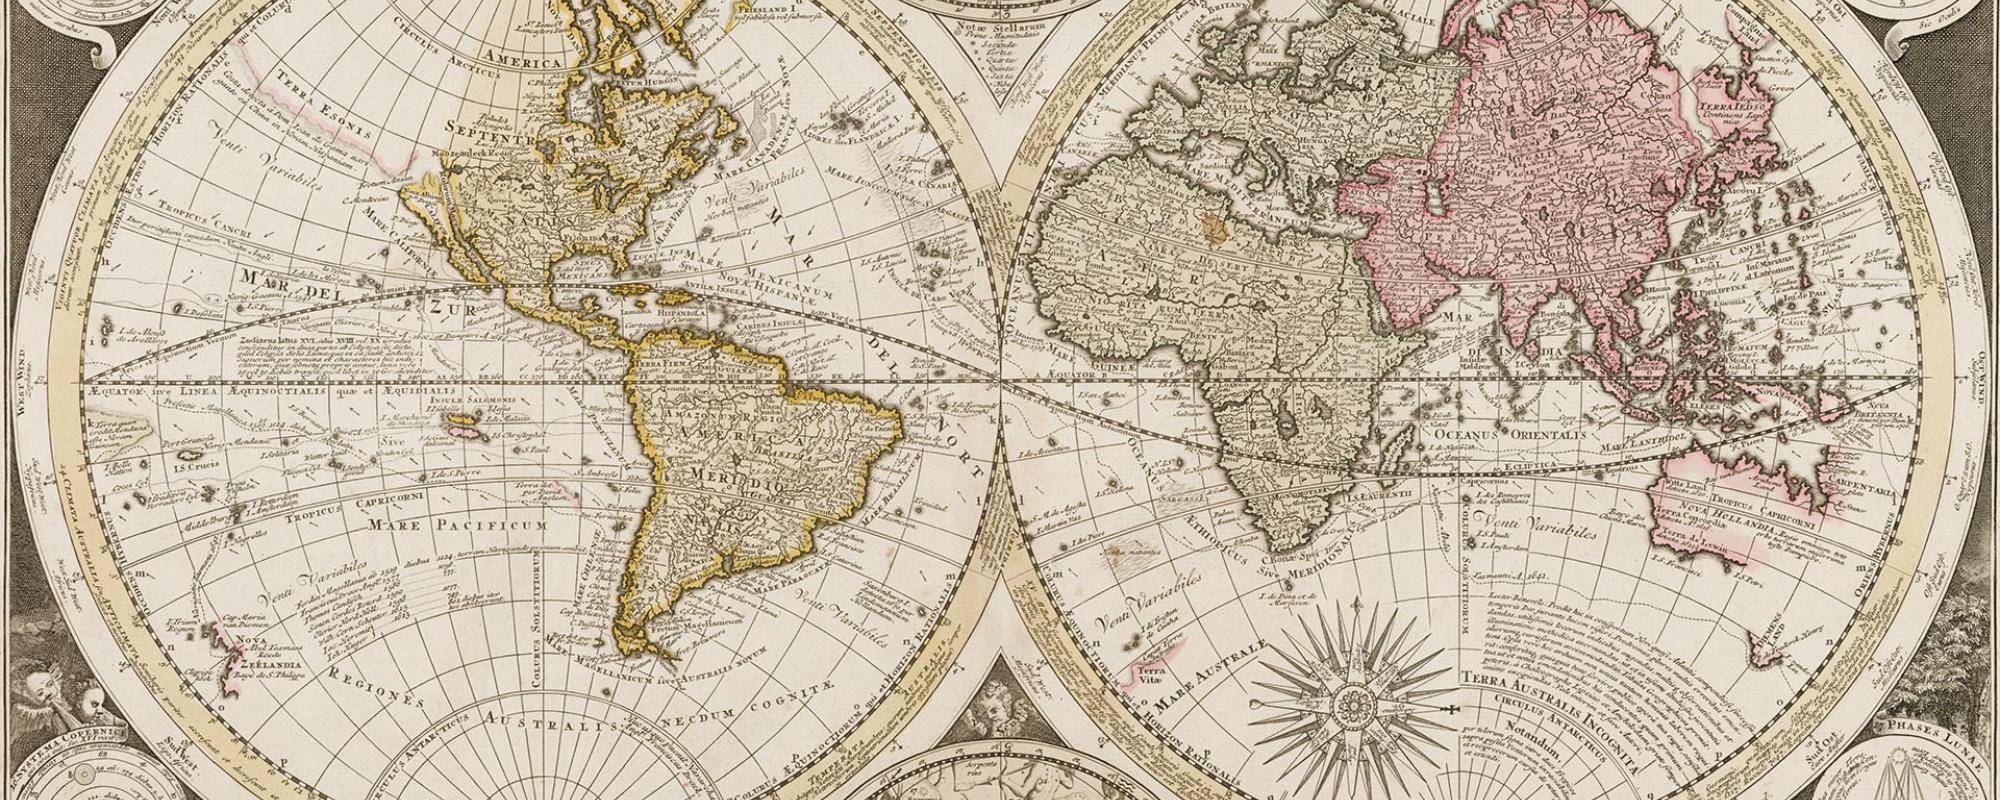 An intricate map of the world in two circles, with other circle-based map views of various hemispheres.